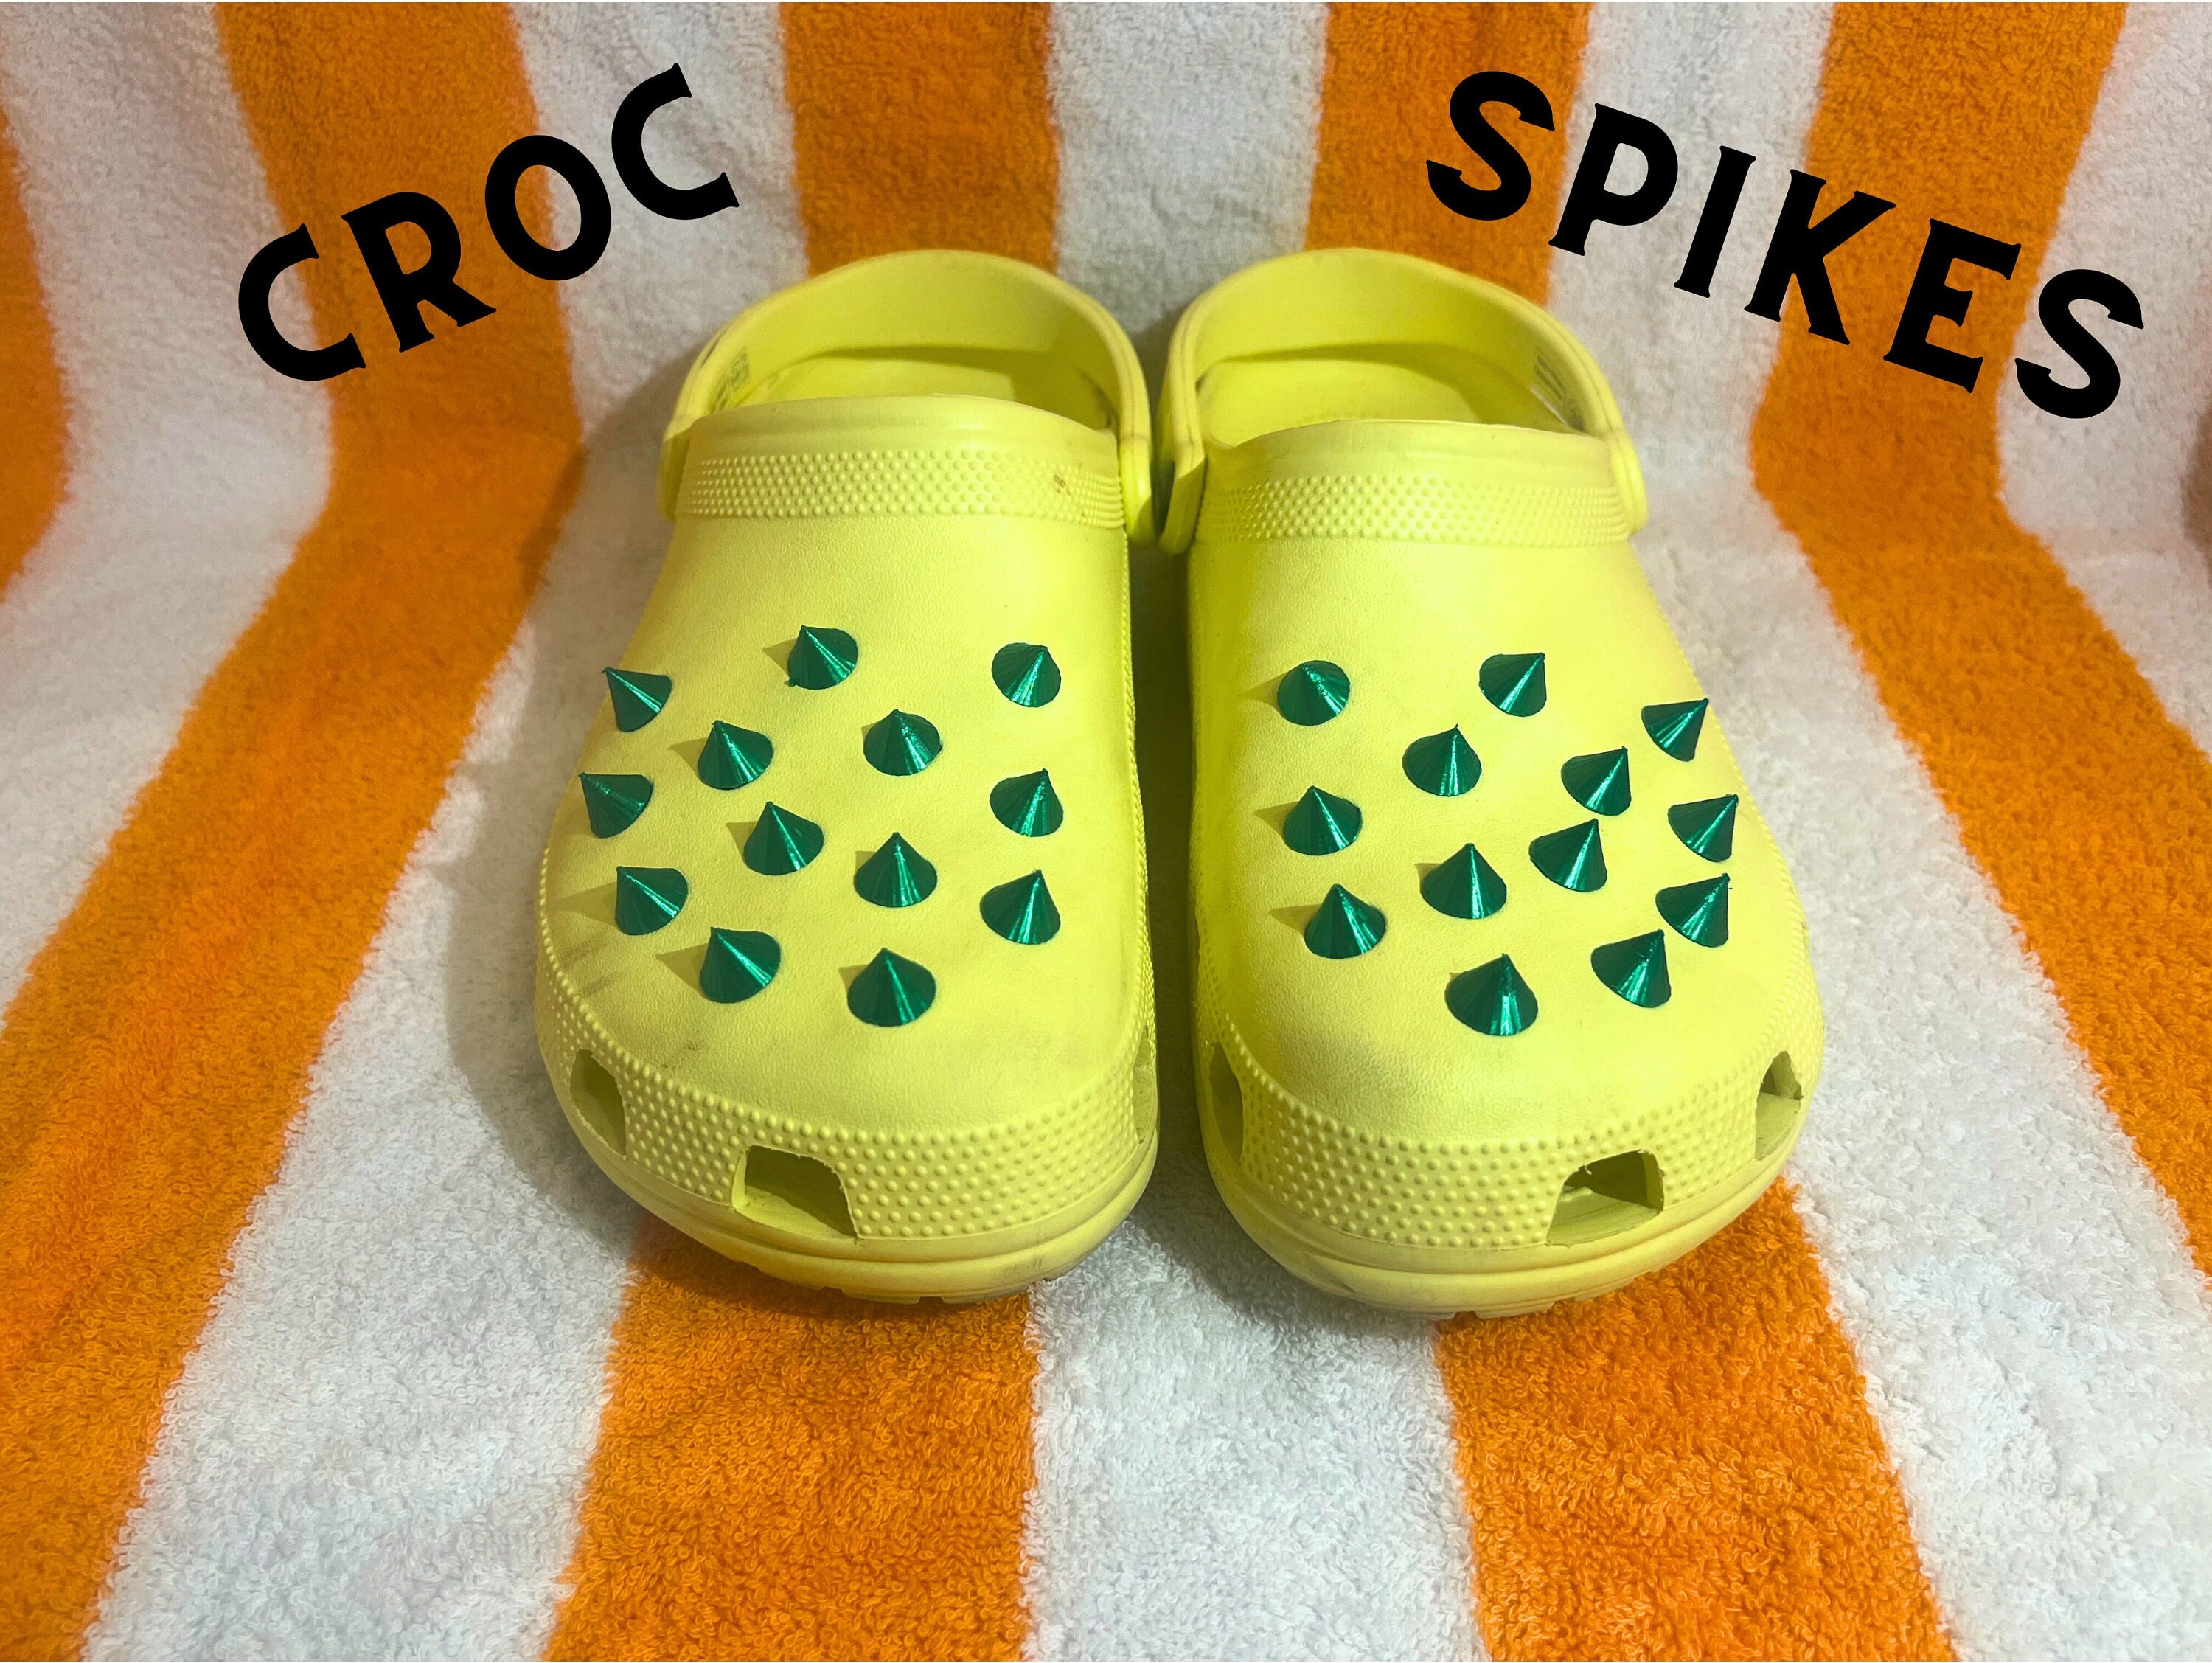 Croc SPIKES pack of 26 cool fun croc charms pck 26 for each hole!